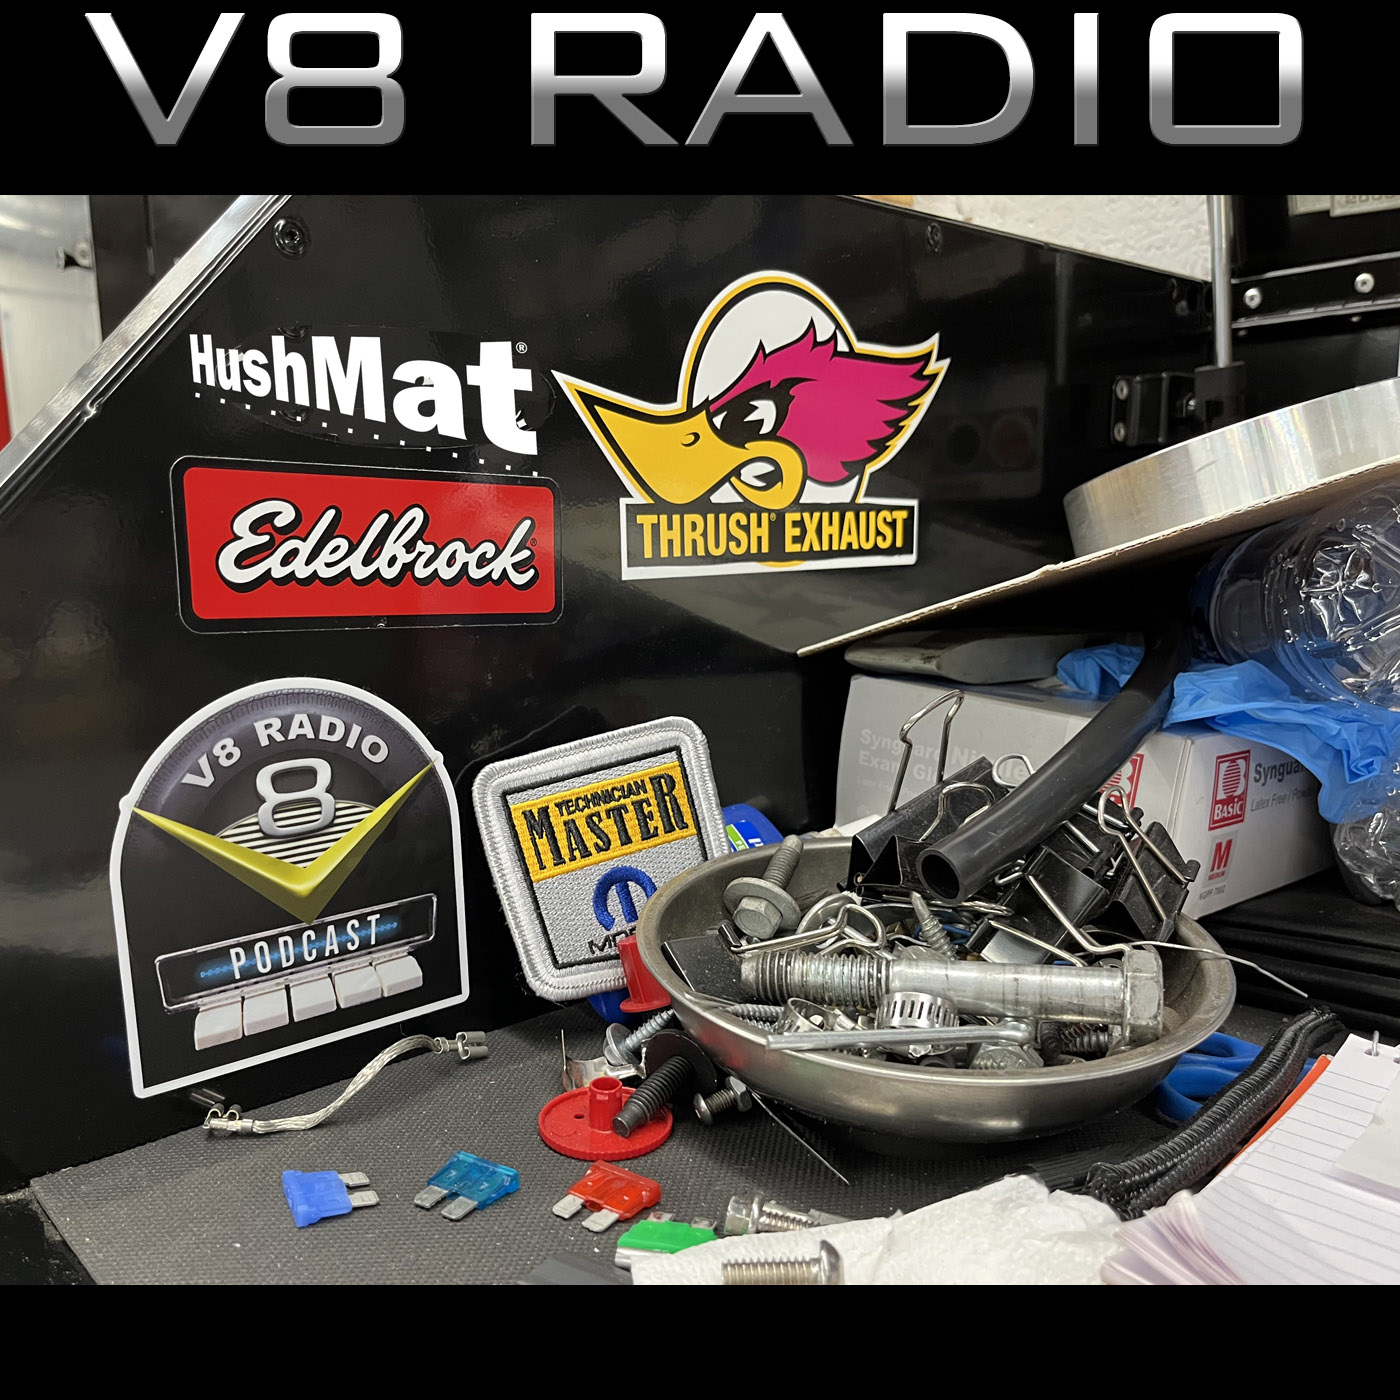 Meeting New Friends, Summer Road Trips, Sharing Enthusiasm, Rick Beato, Nuno Bettencourt, Automotive Trivia and More on the V8 Radio Podcast!